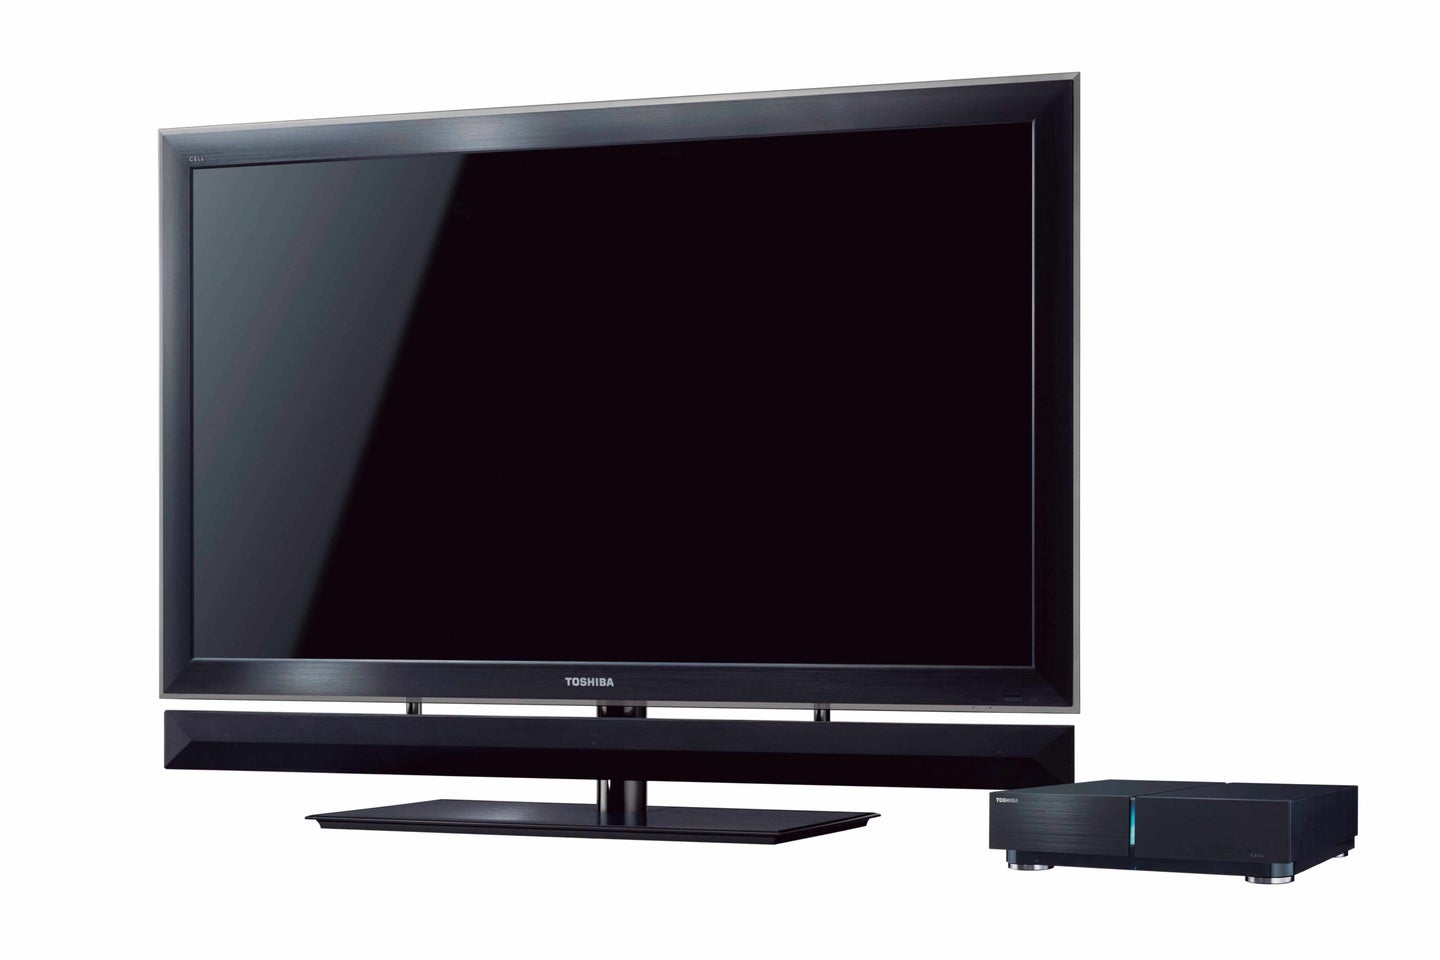 Toshiba Cell TV Converts All Video to 3-D With Playstation 3’s Processor